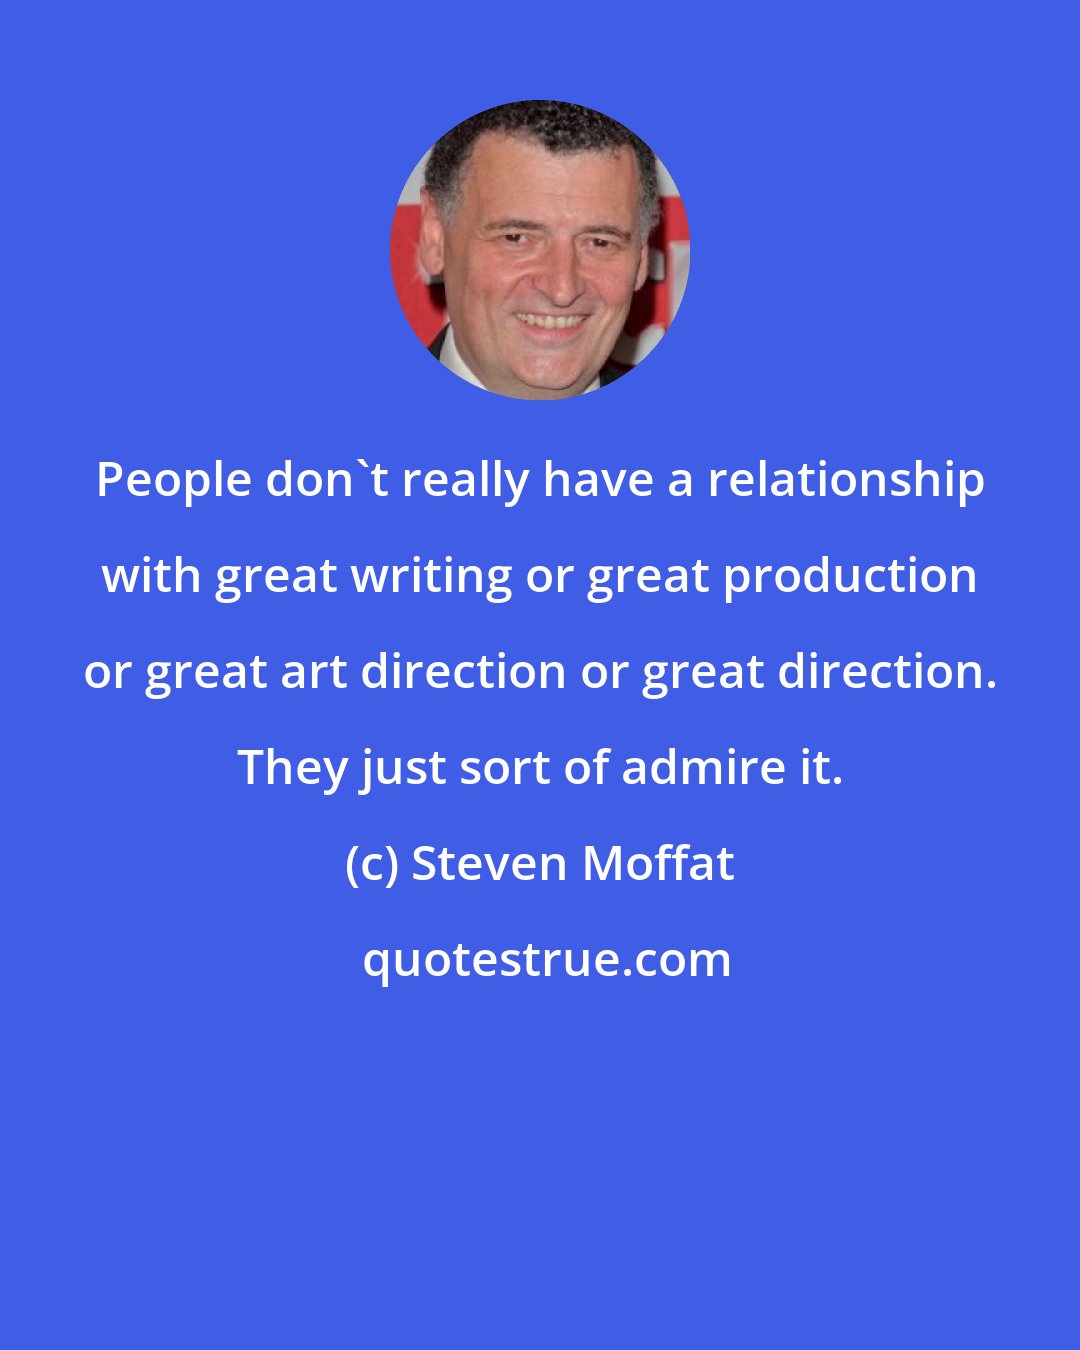 Steven Moffat: People don't really have a relationship with great writing or great production or great art direction or great direction. They just sort of admire it.